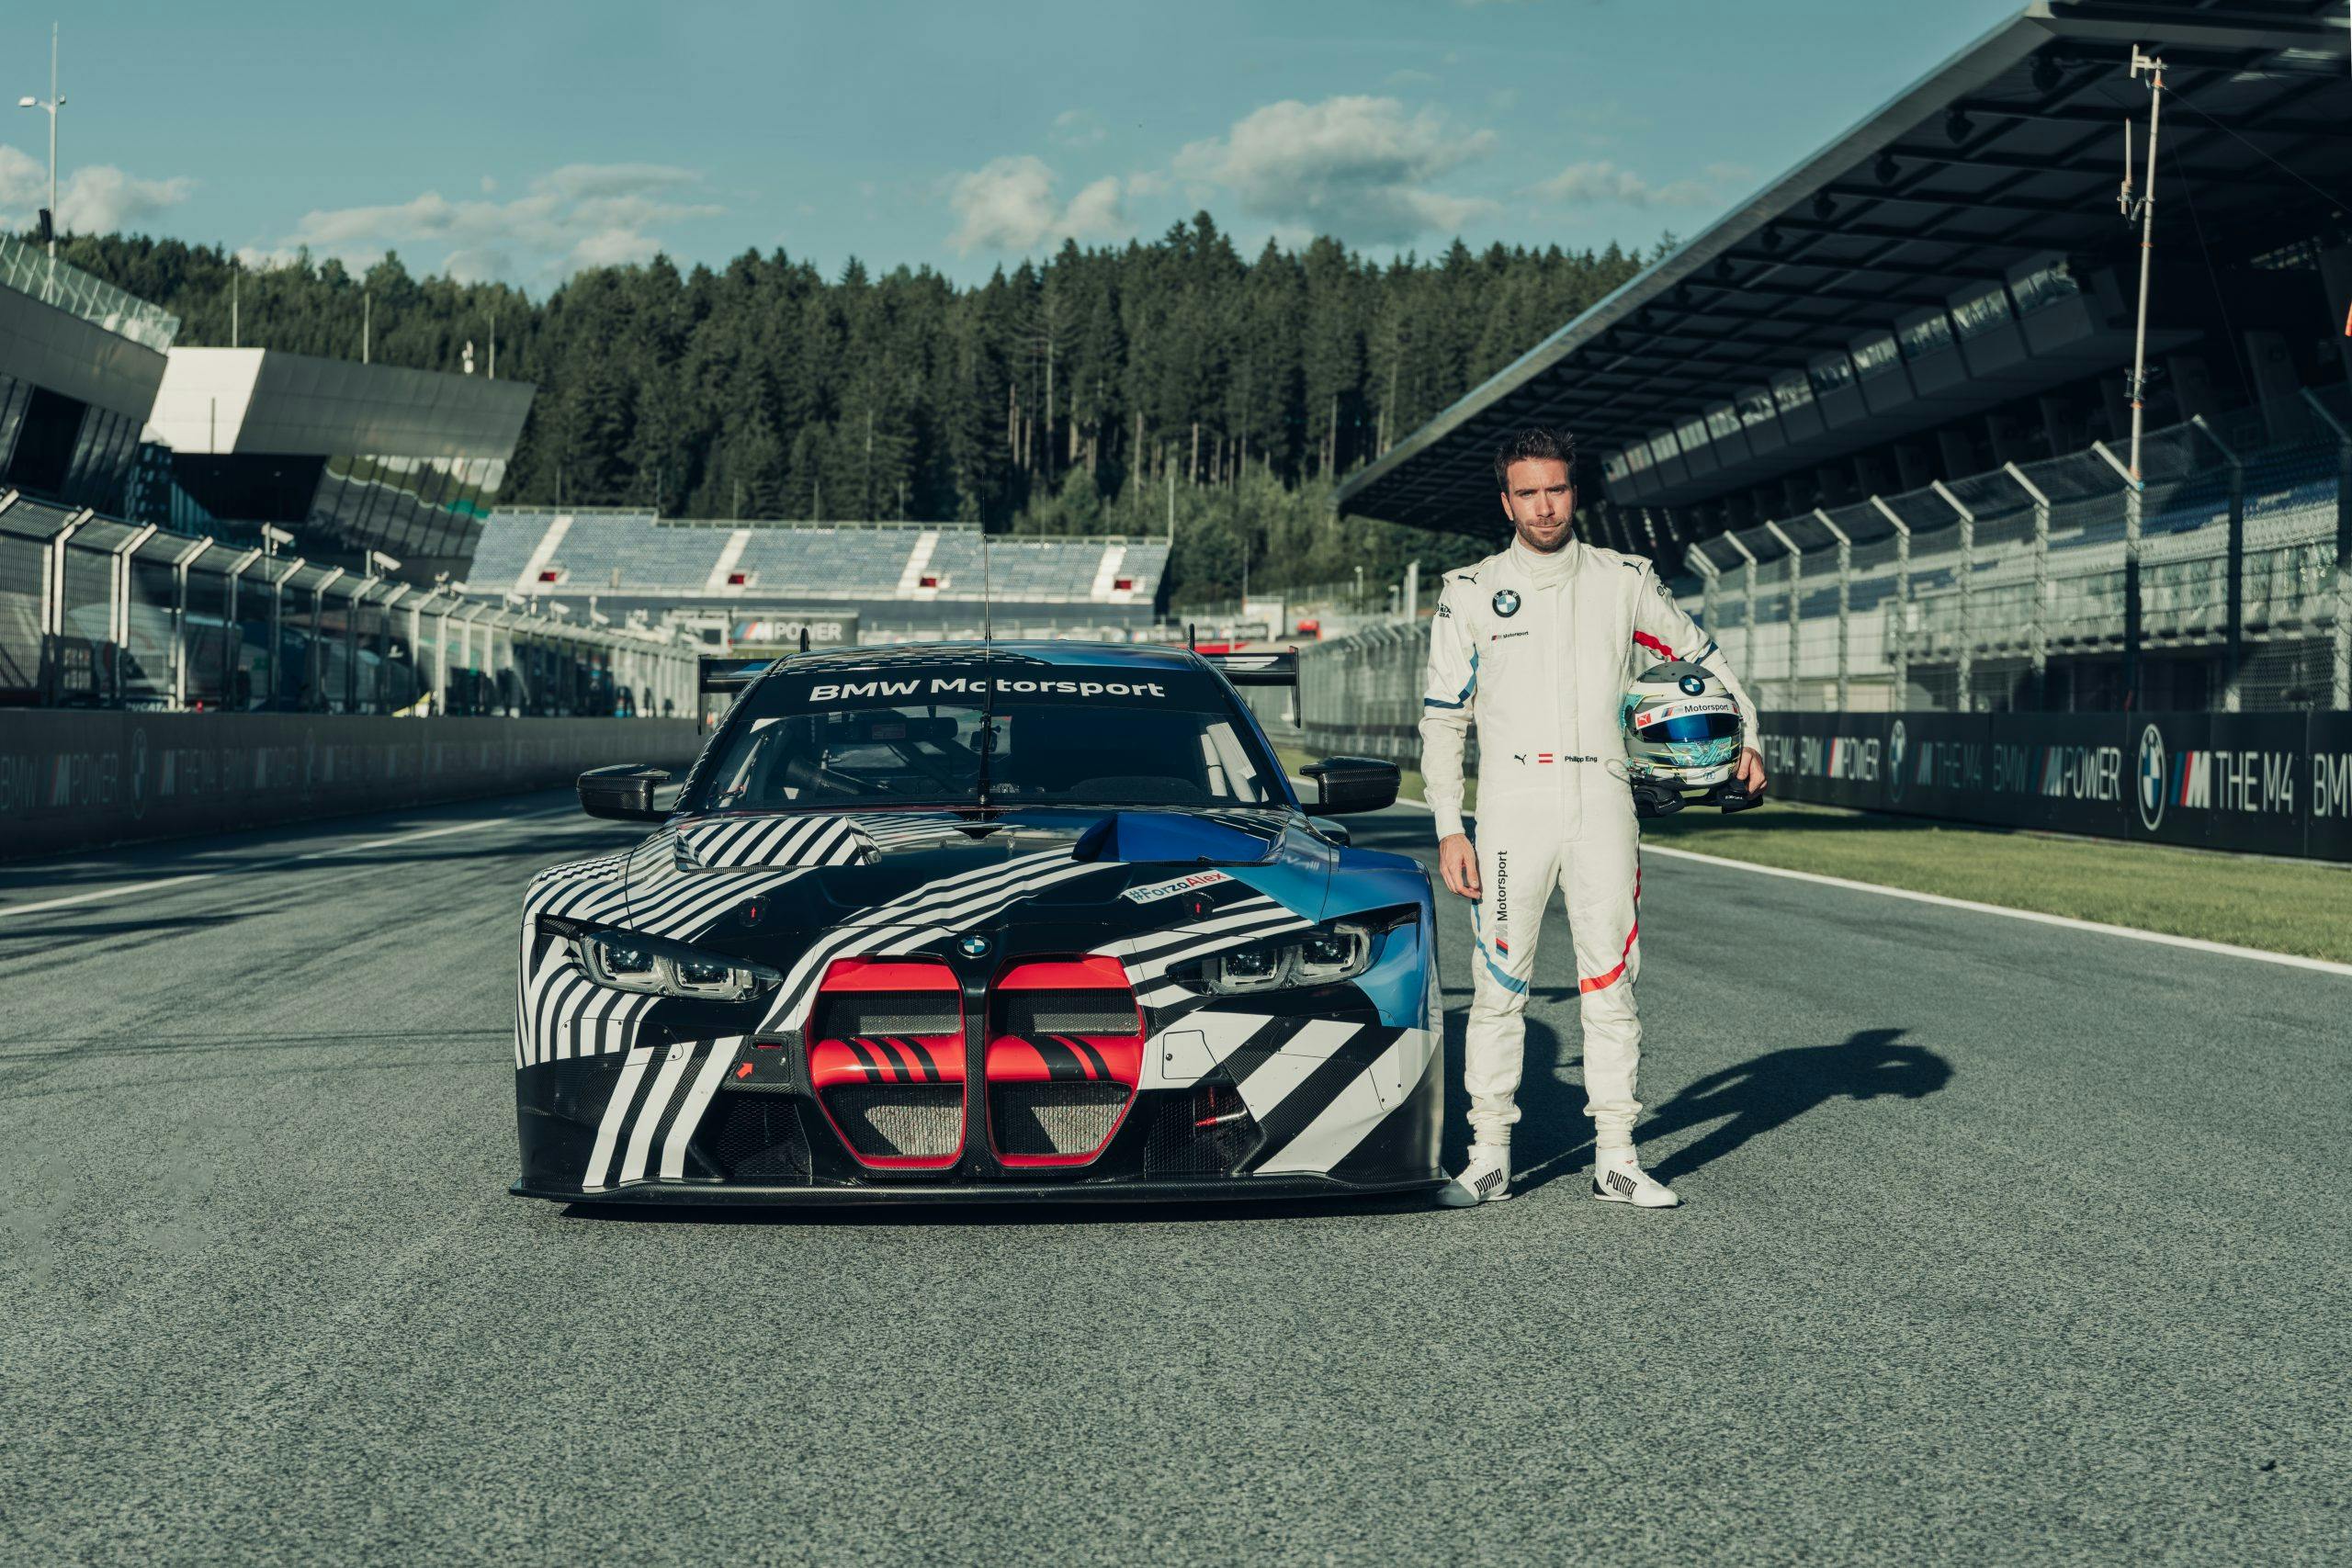 2021 BMW M4 GT3 prototype Red Bull Ring August 2020 Philipp Eng